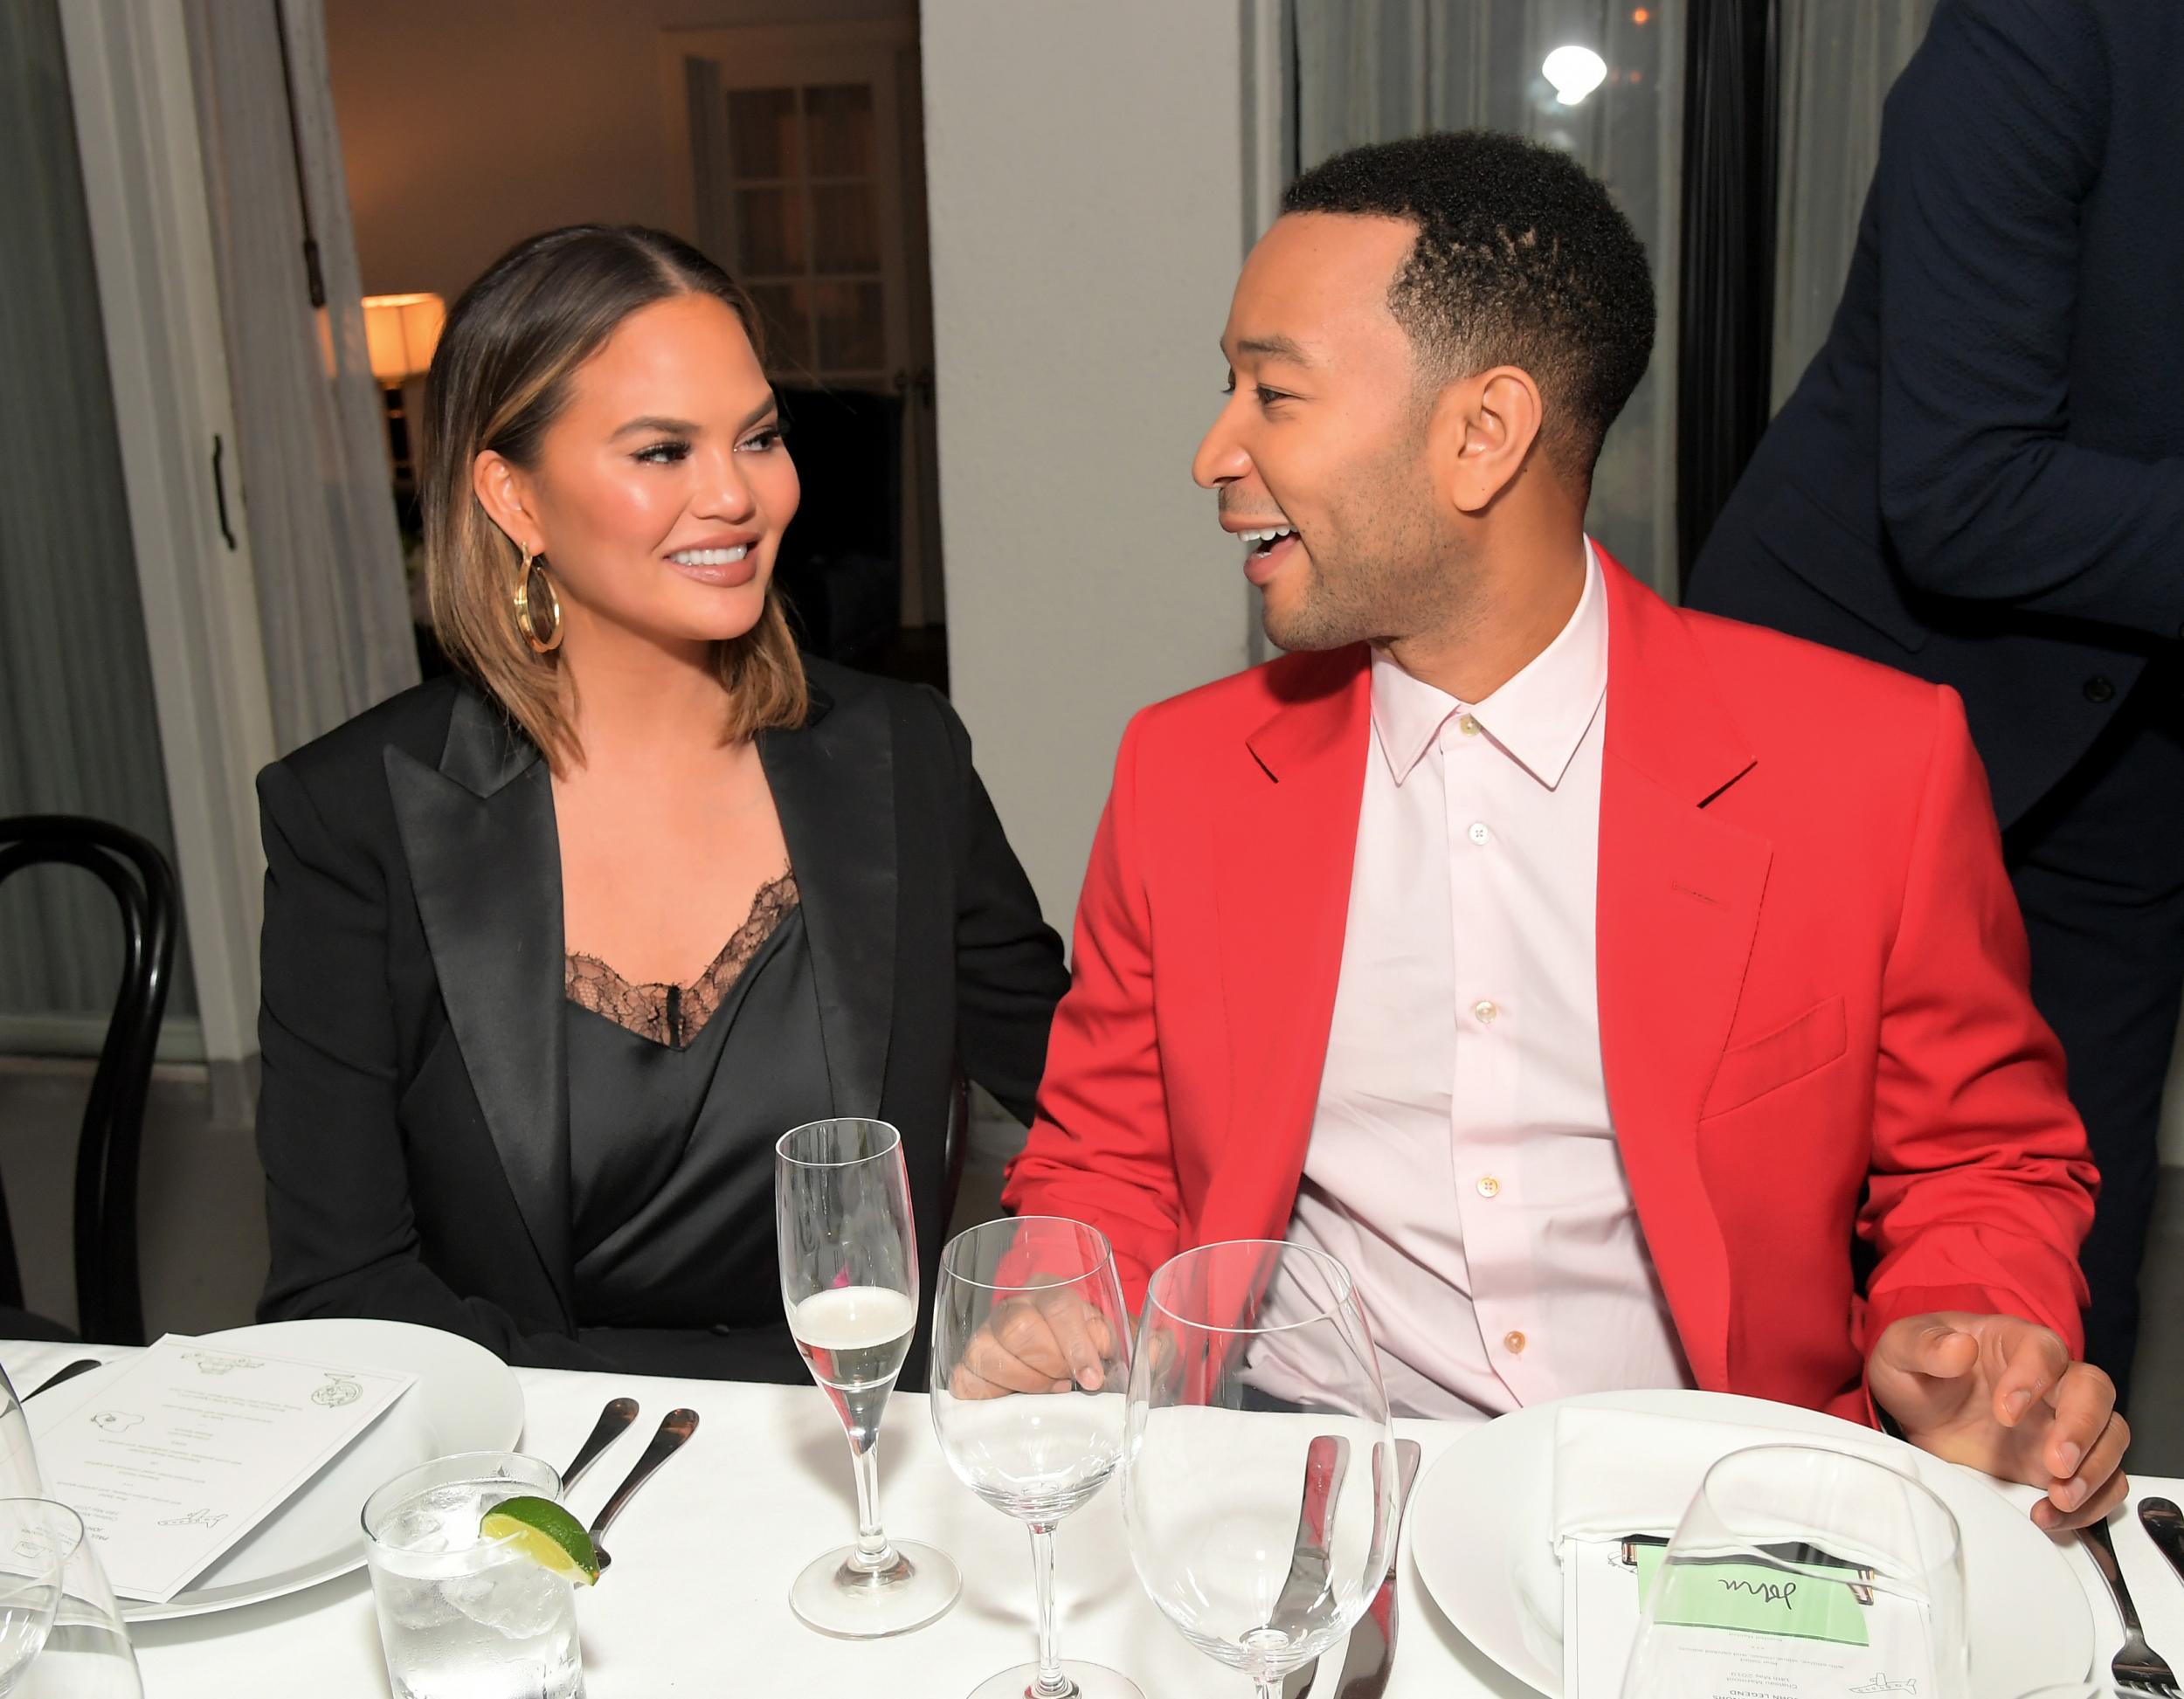 Chrissy Teigen and her husband, John Legend, who she described as "great and helpful"